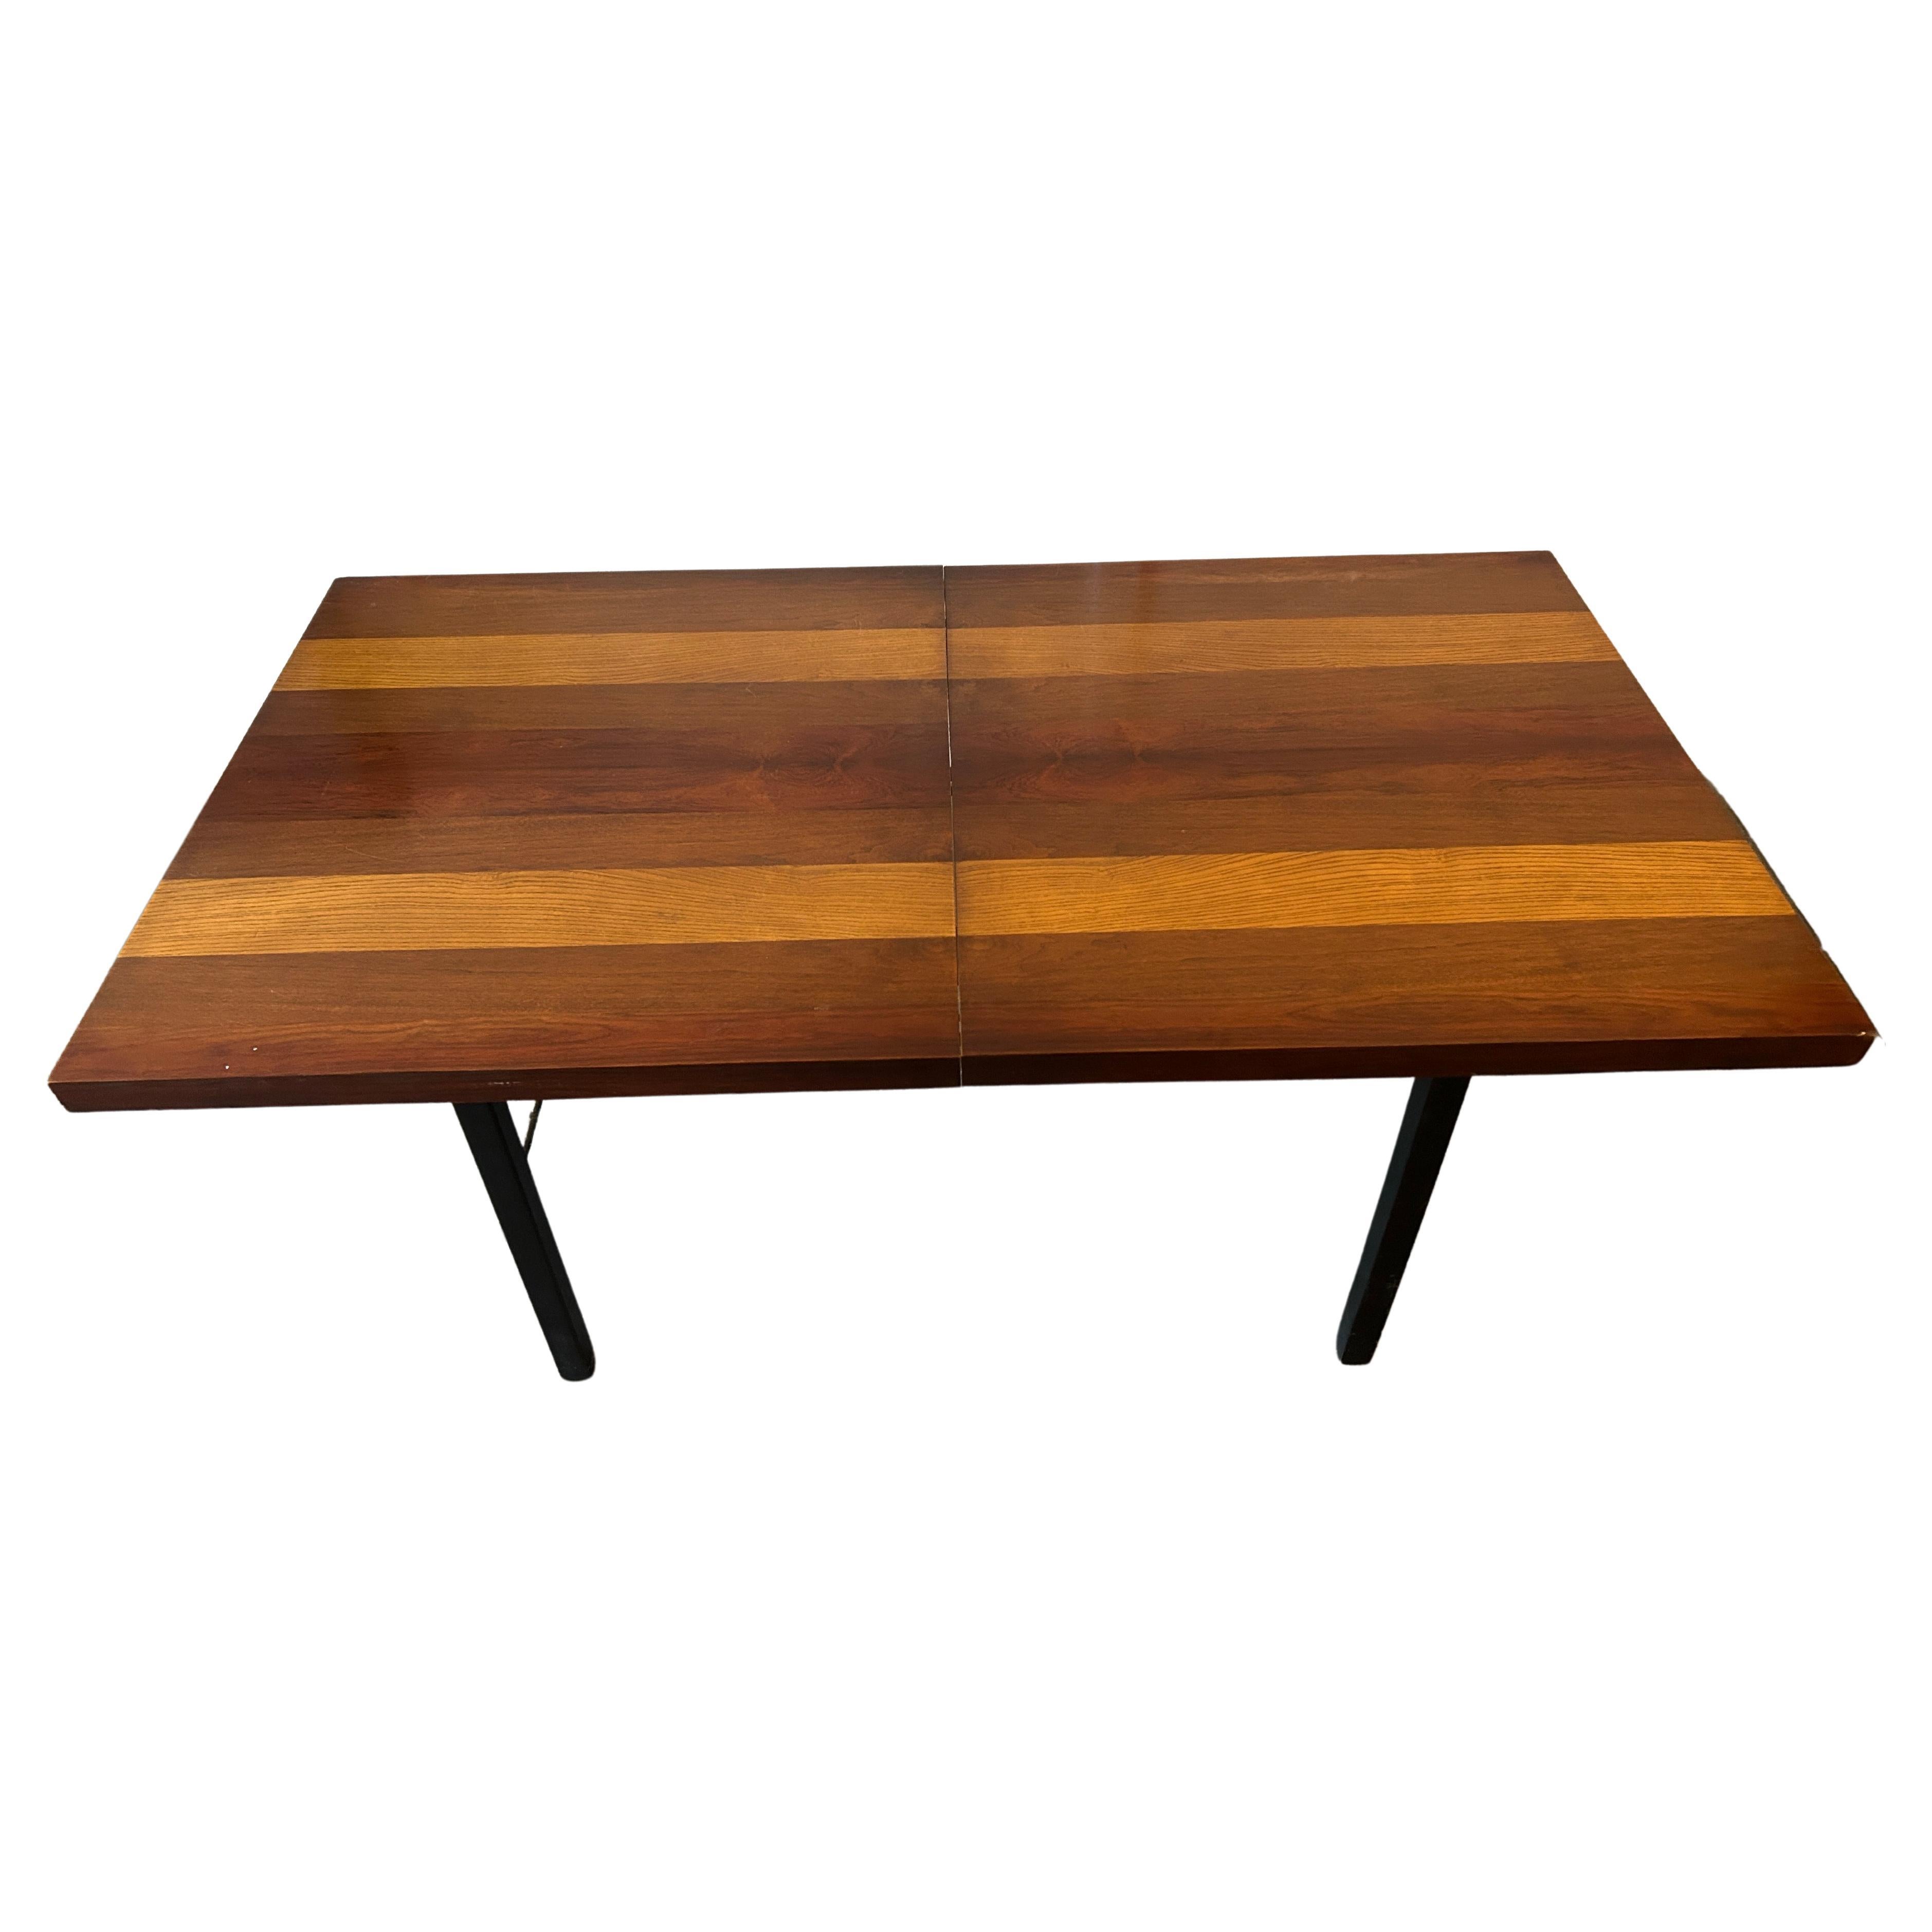 Rosewood Midcentury Expandable Dining Table by Milo Baughman with '2' Leaves